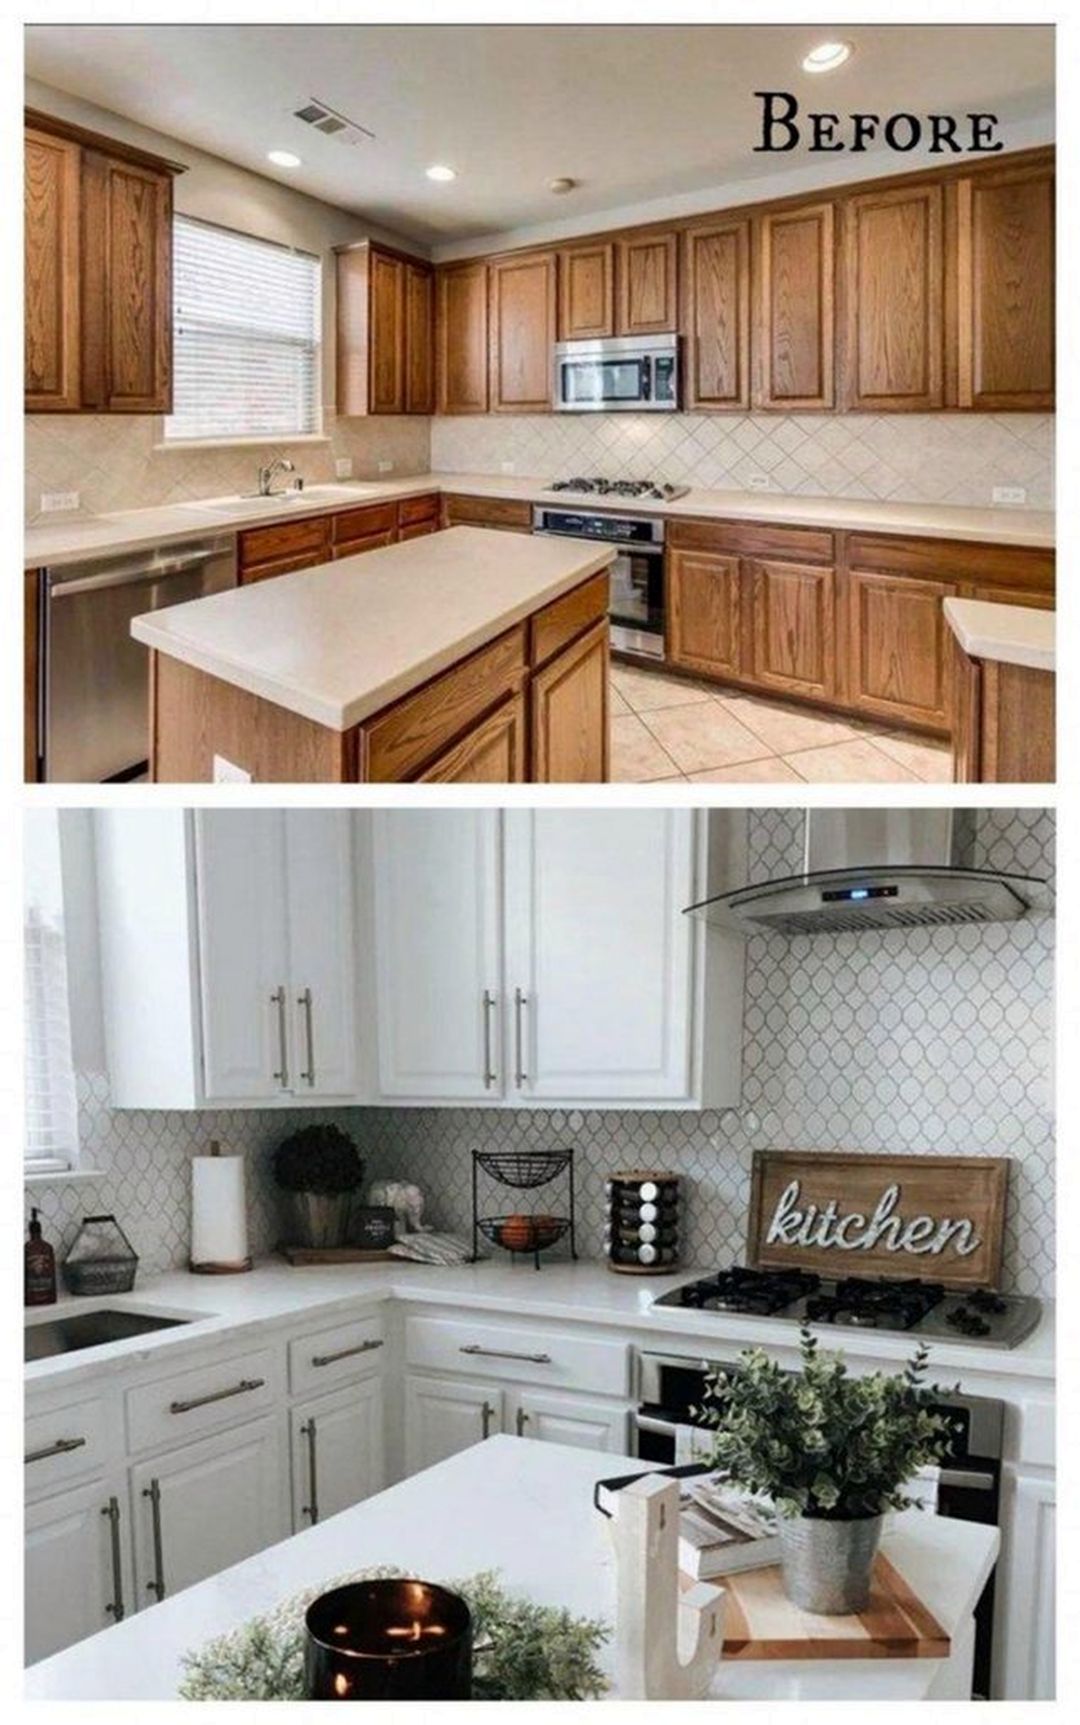 Awesome Kitchen Makeover Ideas